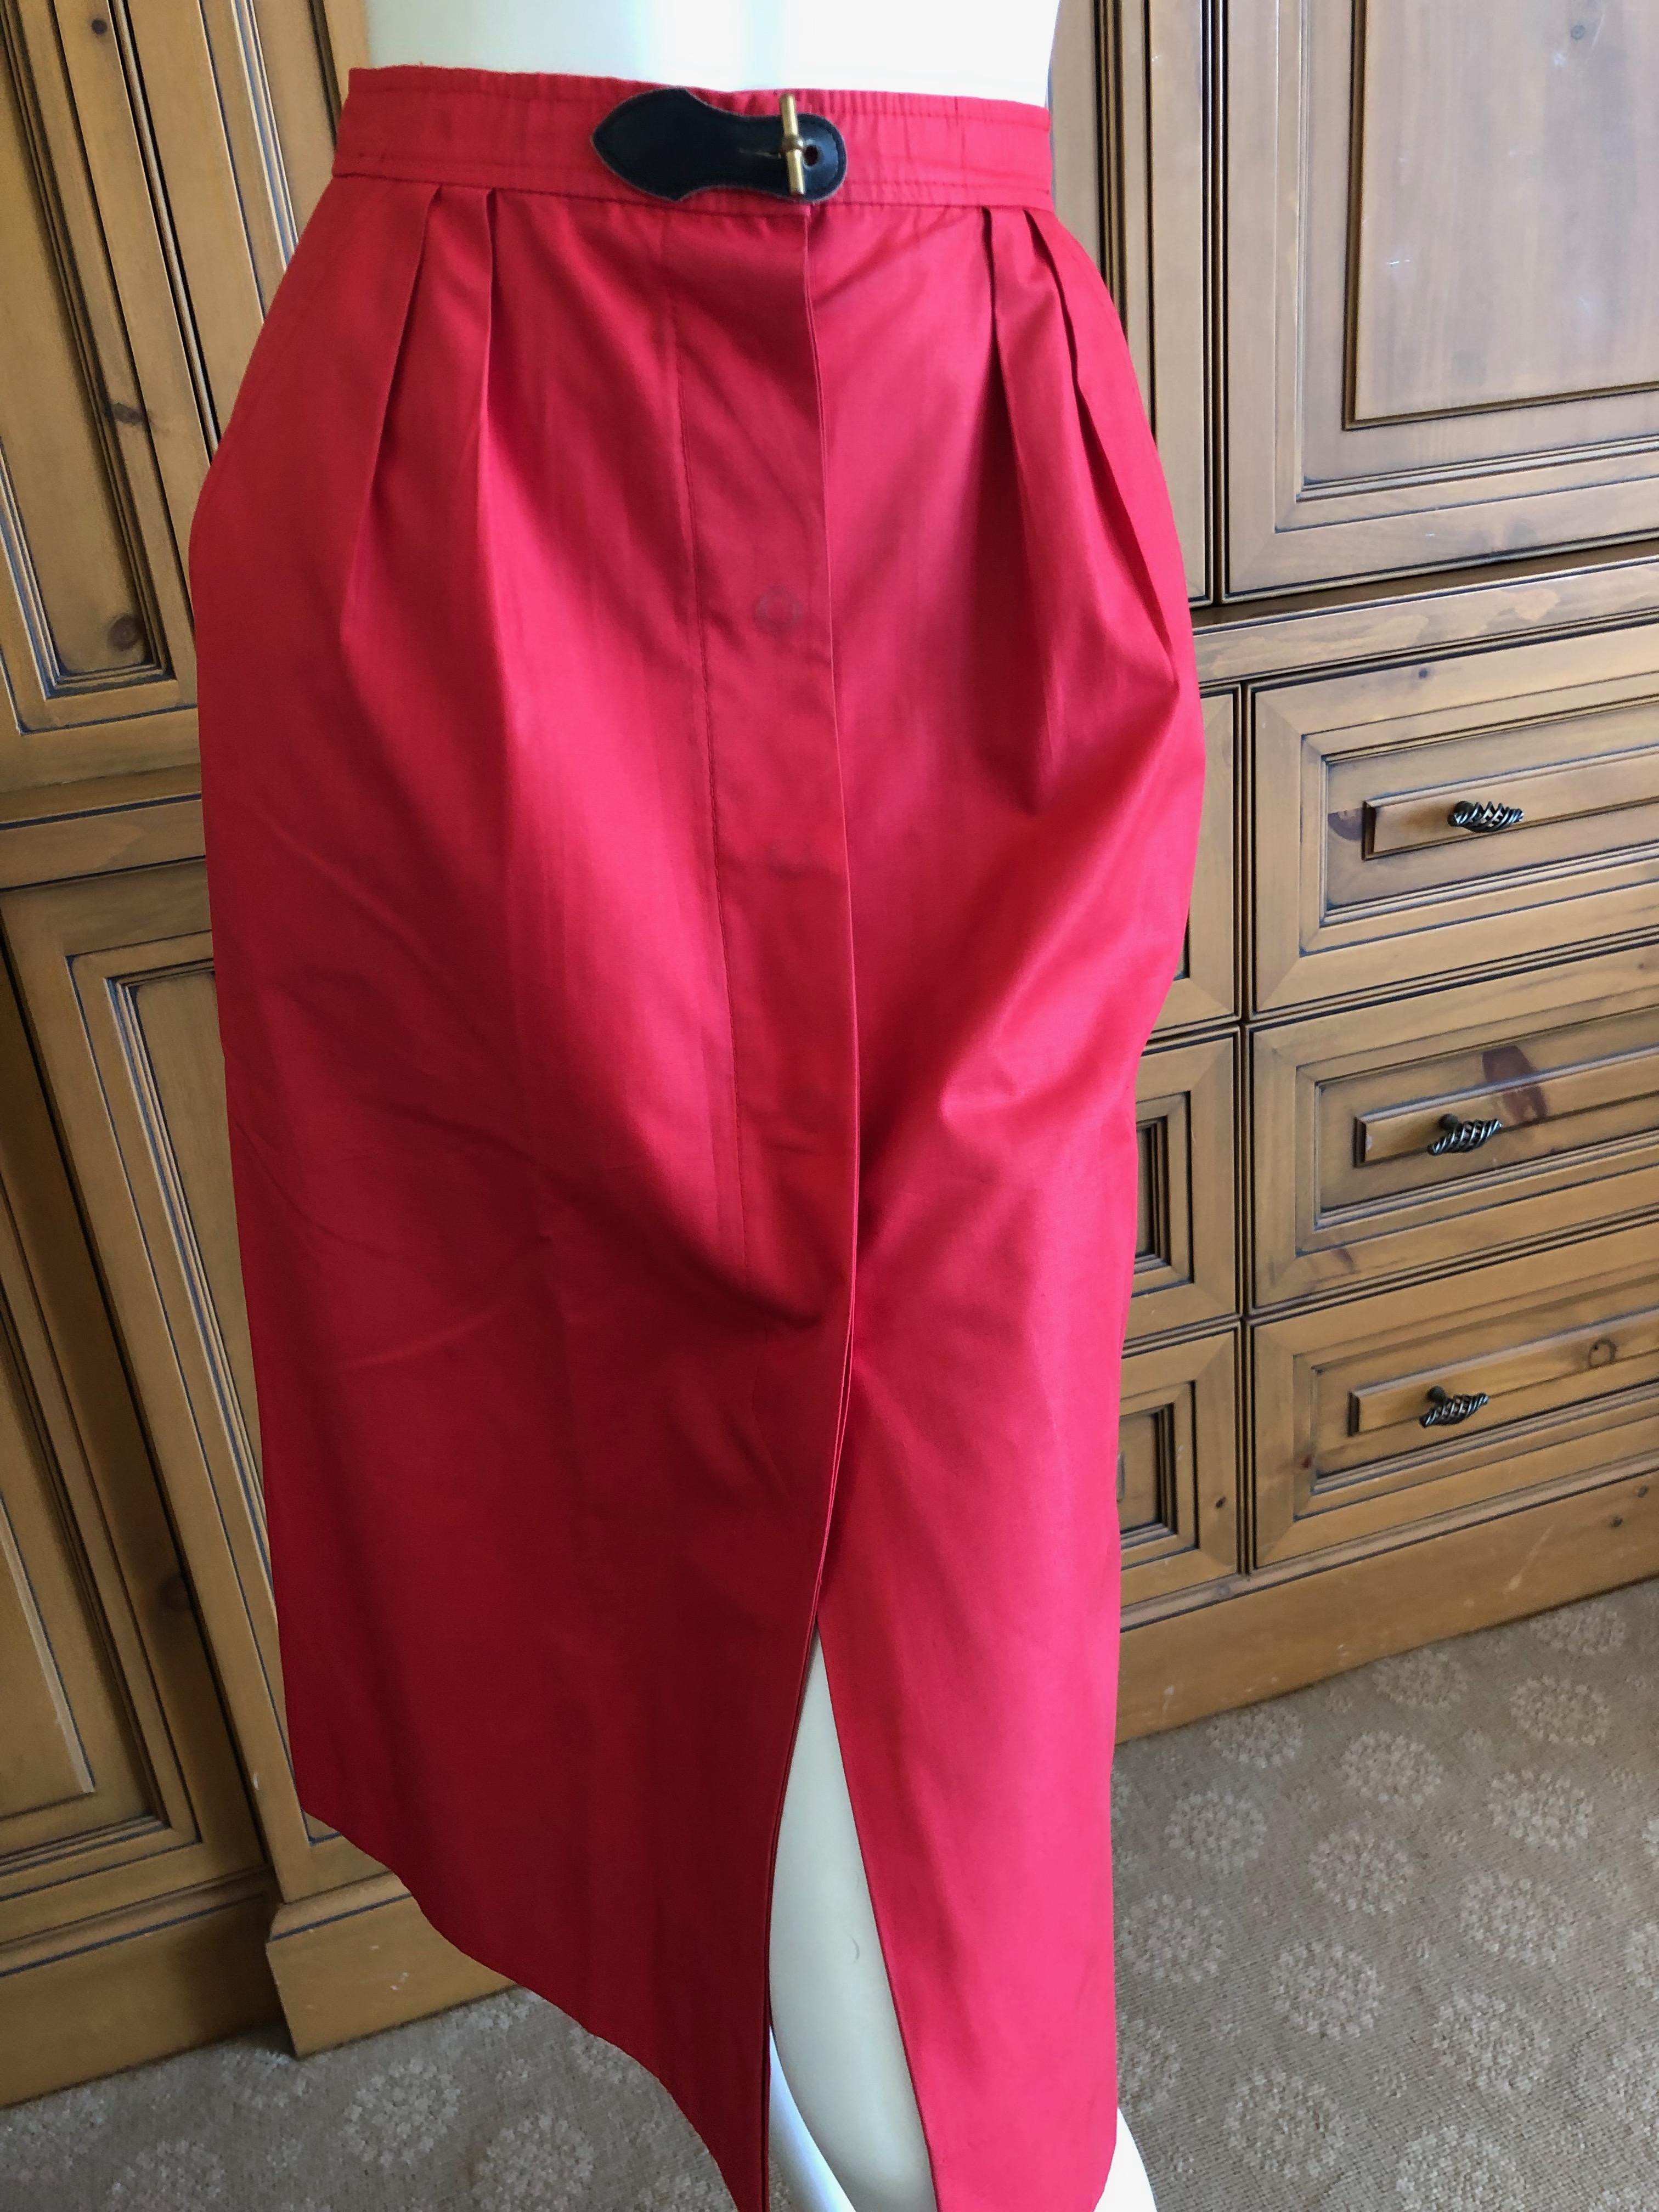 Hermes Paris Vintage Red Polished Cotton Skirt Suit with Signature Details In Excellent Condition For Sale In Cloverdale, CA